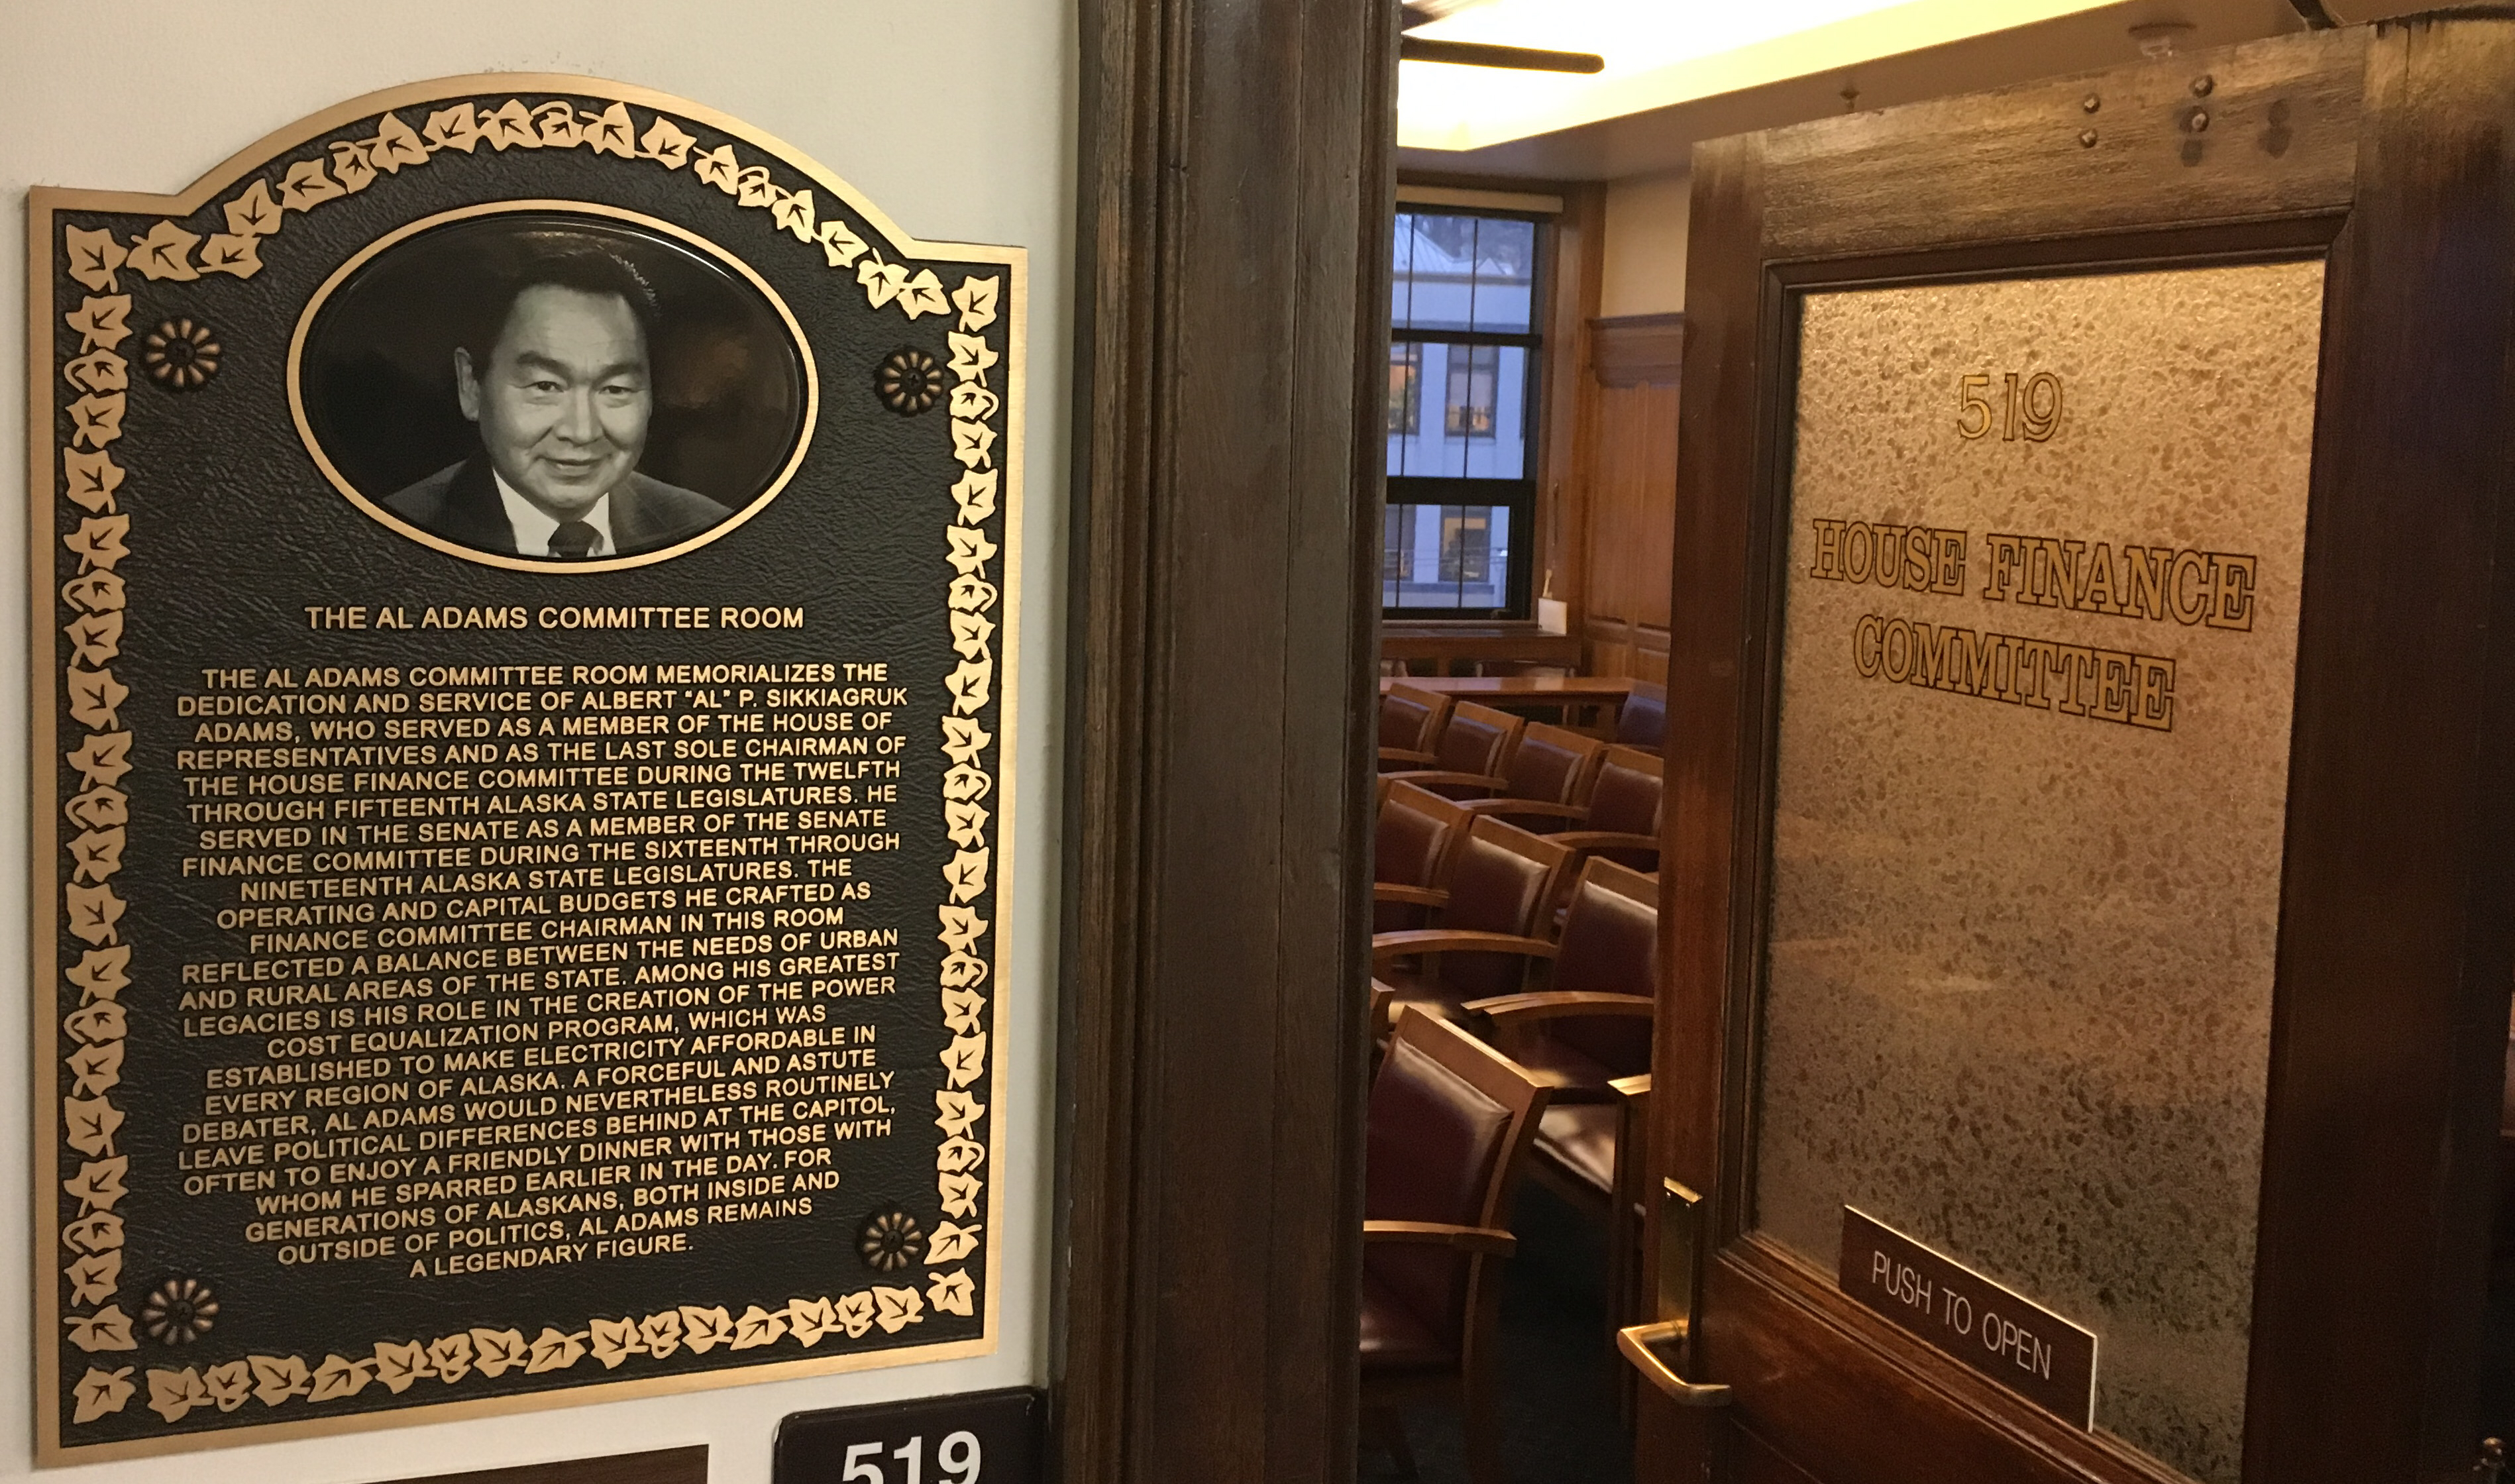 This plaque marks the newly renamed Al Adams Committee Room, where the House Finance Committee meets, Feb. 22, 2018. House finance subcommittees have been finishing their work this week. (Photo by Andrew Kitchenman/KTOO)